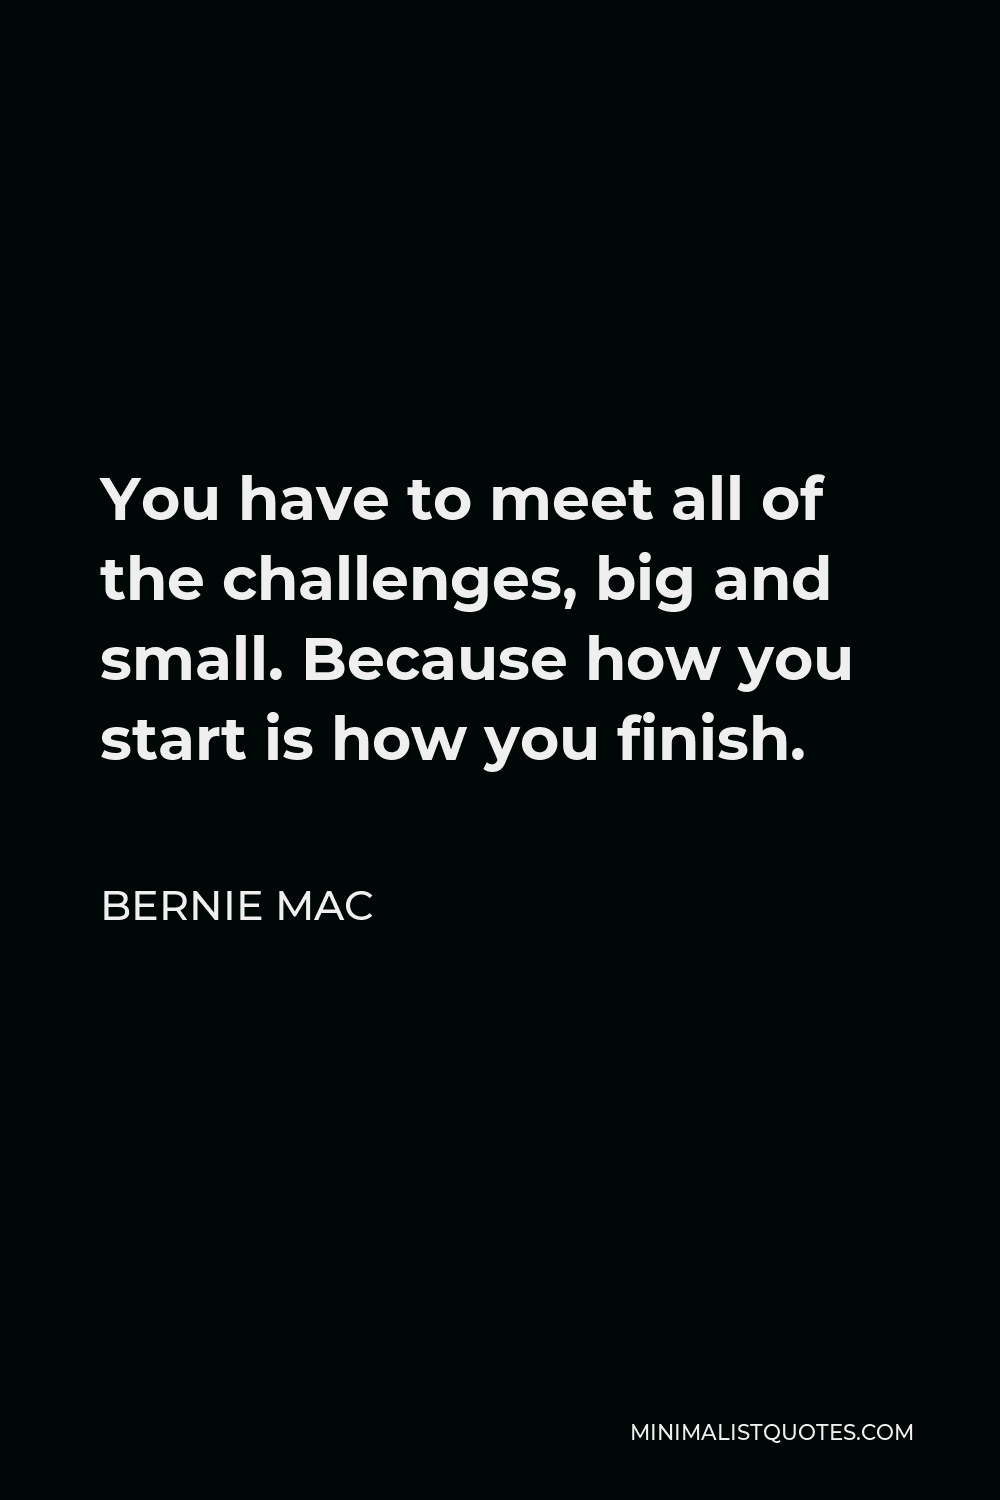 Bernie Mac Quote - You have to meet all of the challenges, big and small. Because how you start is how you finish.